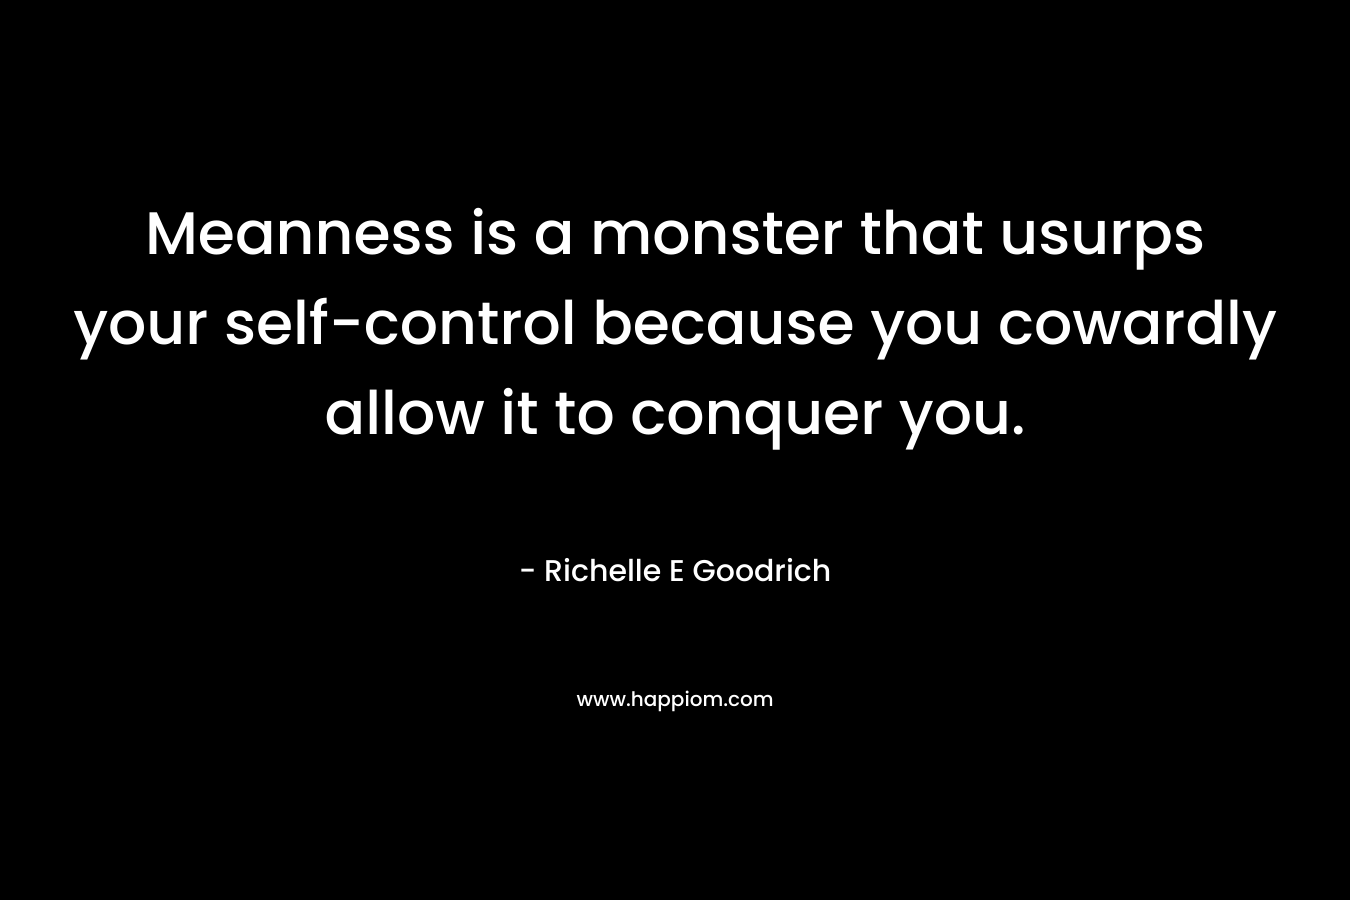 Meanness is a monster that usurps your self-control because you cowardly allow it to conquer you. – Richelle E Goodrich